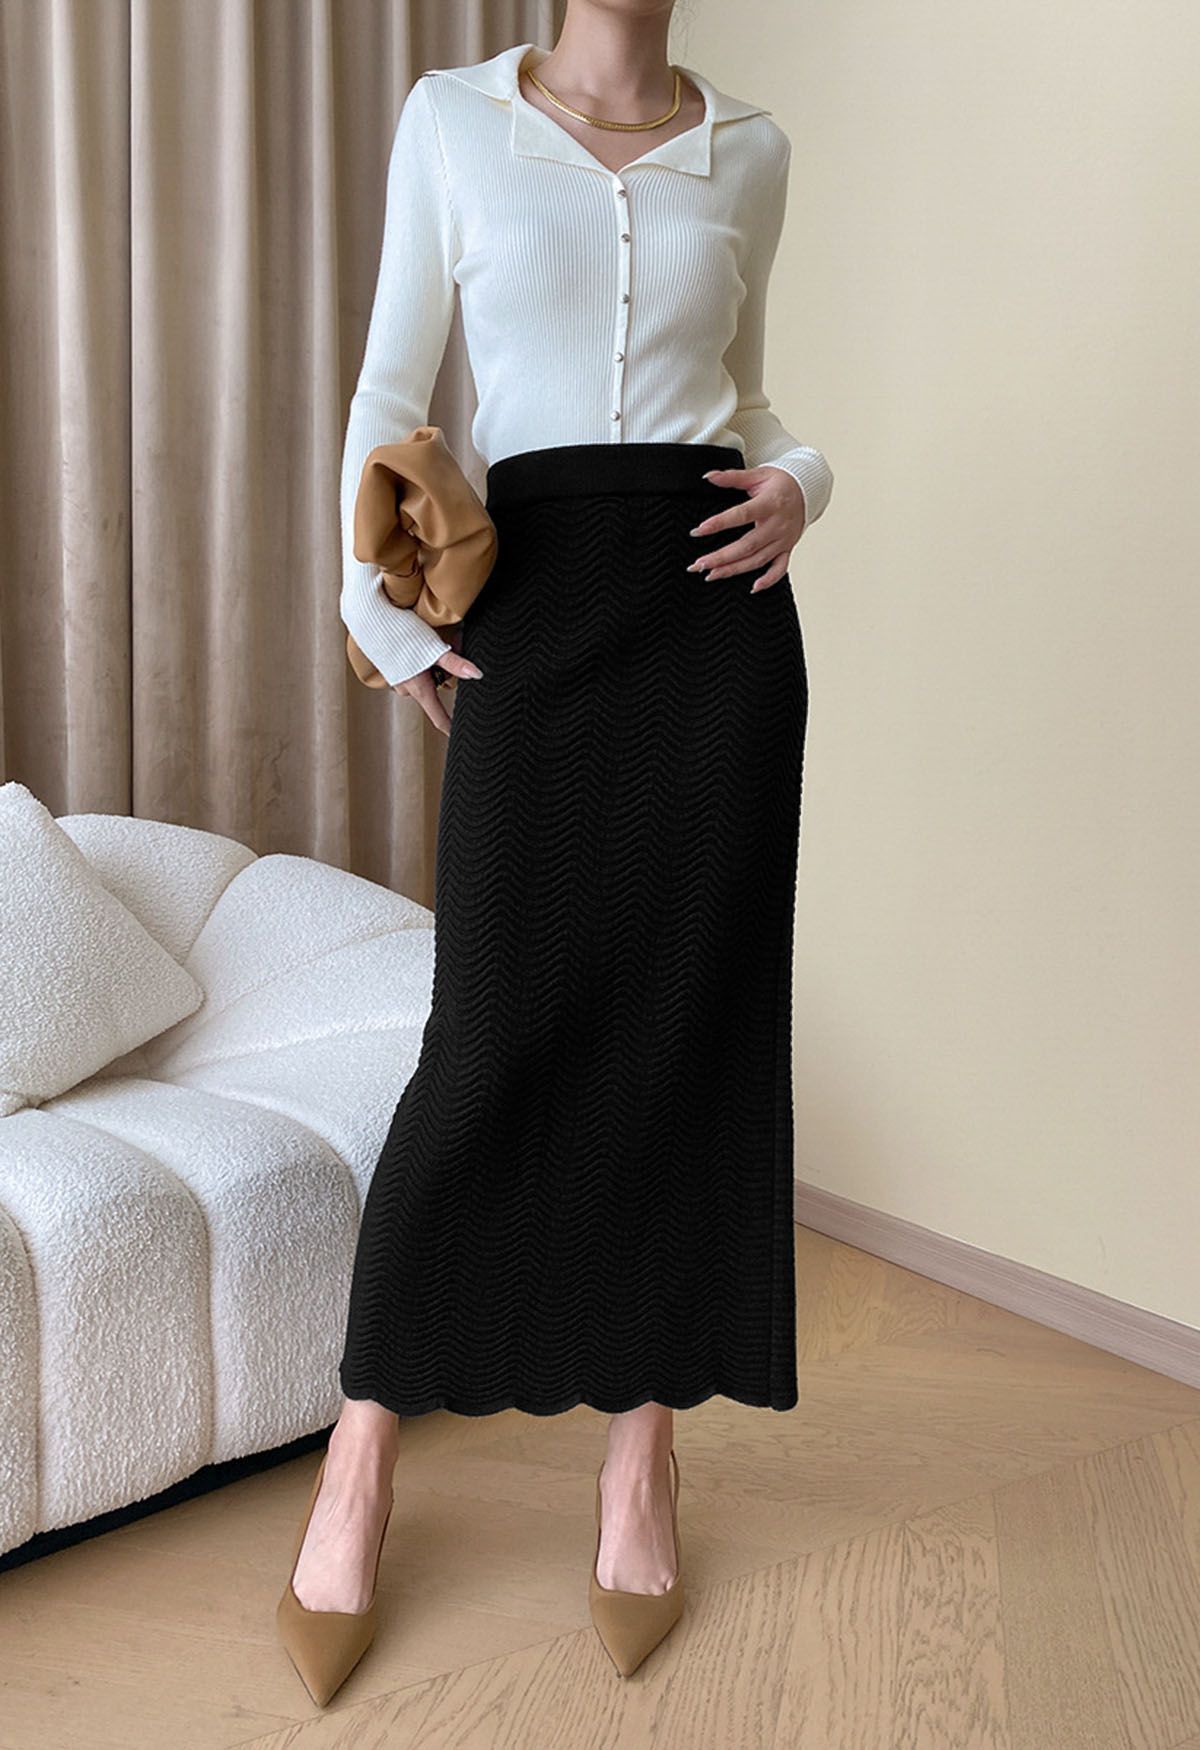 Embossed Wavy Texture Knit Pencil Skirt in Black